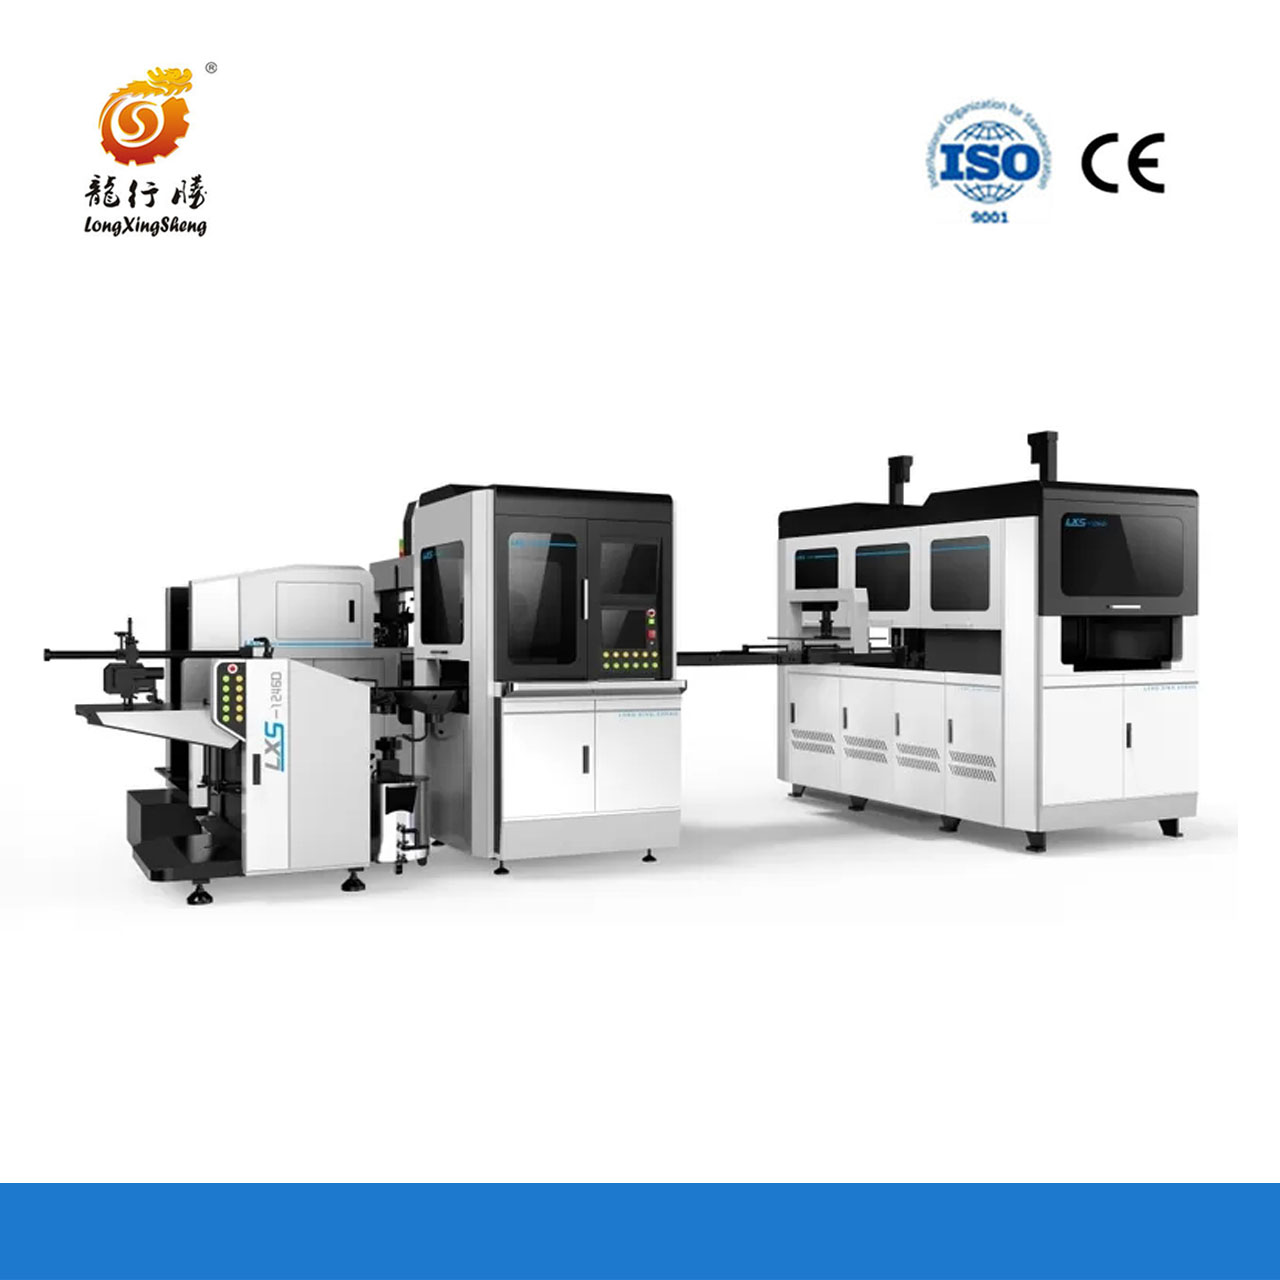  Fully Automatic Rigid Box Making Machine for Game Box Manufacturer